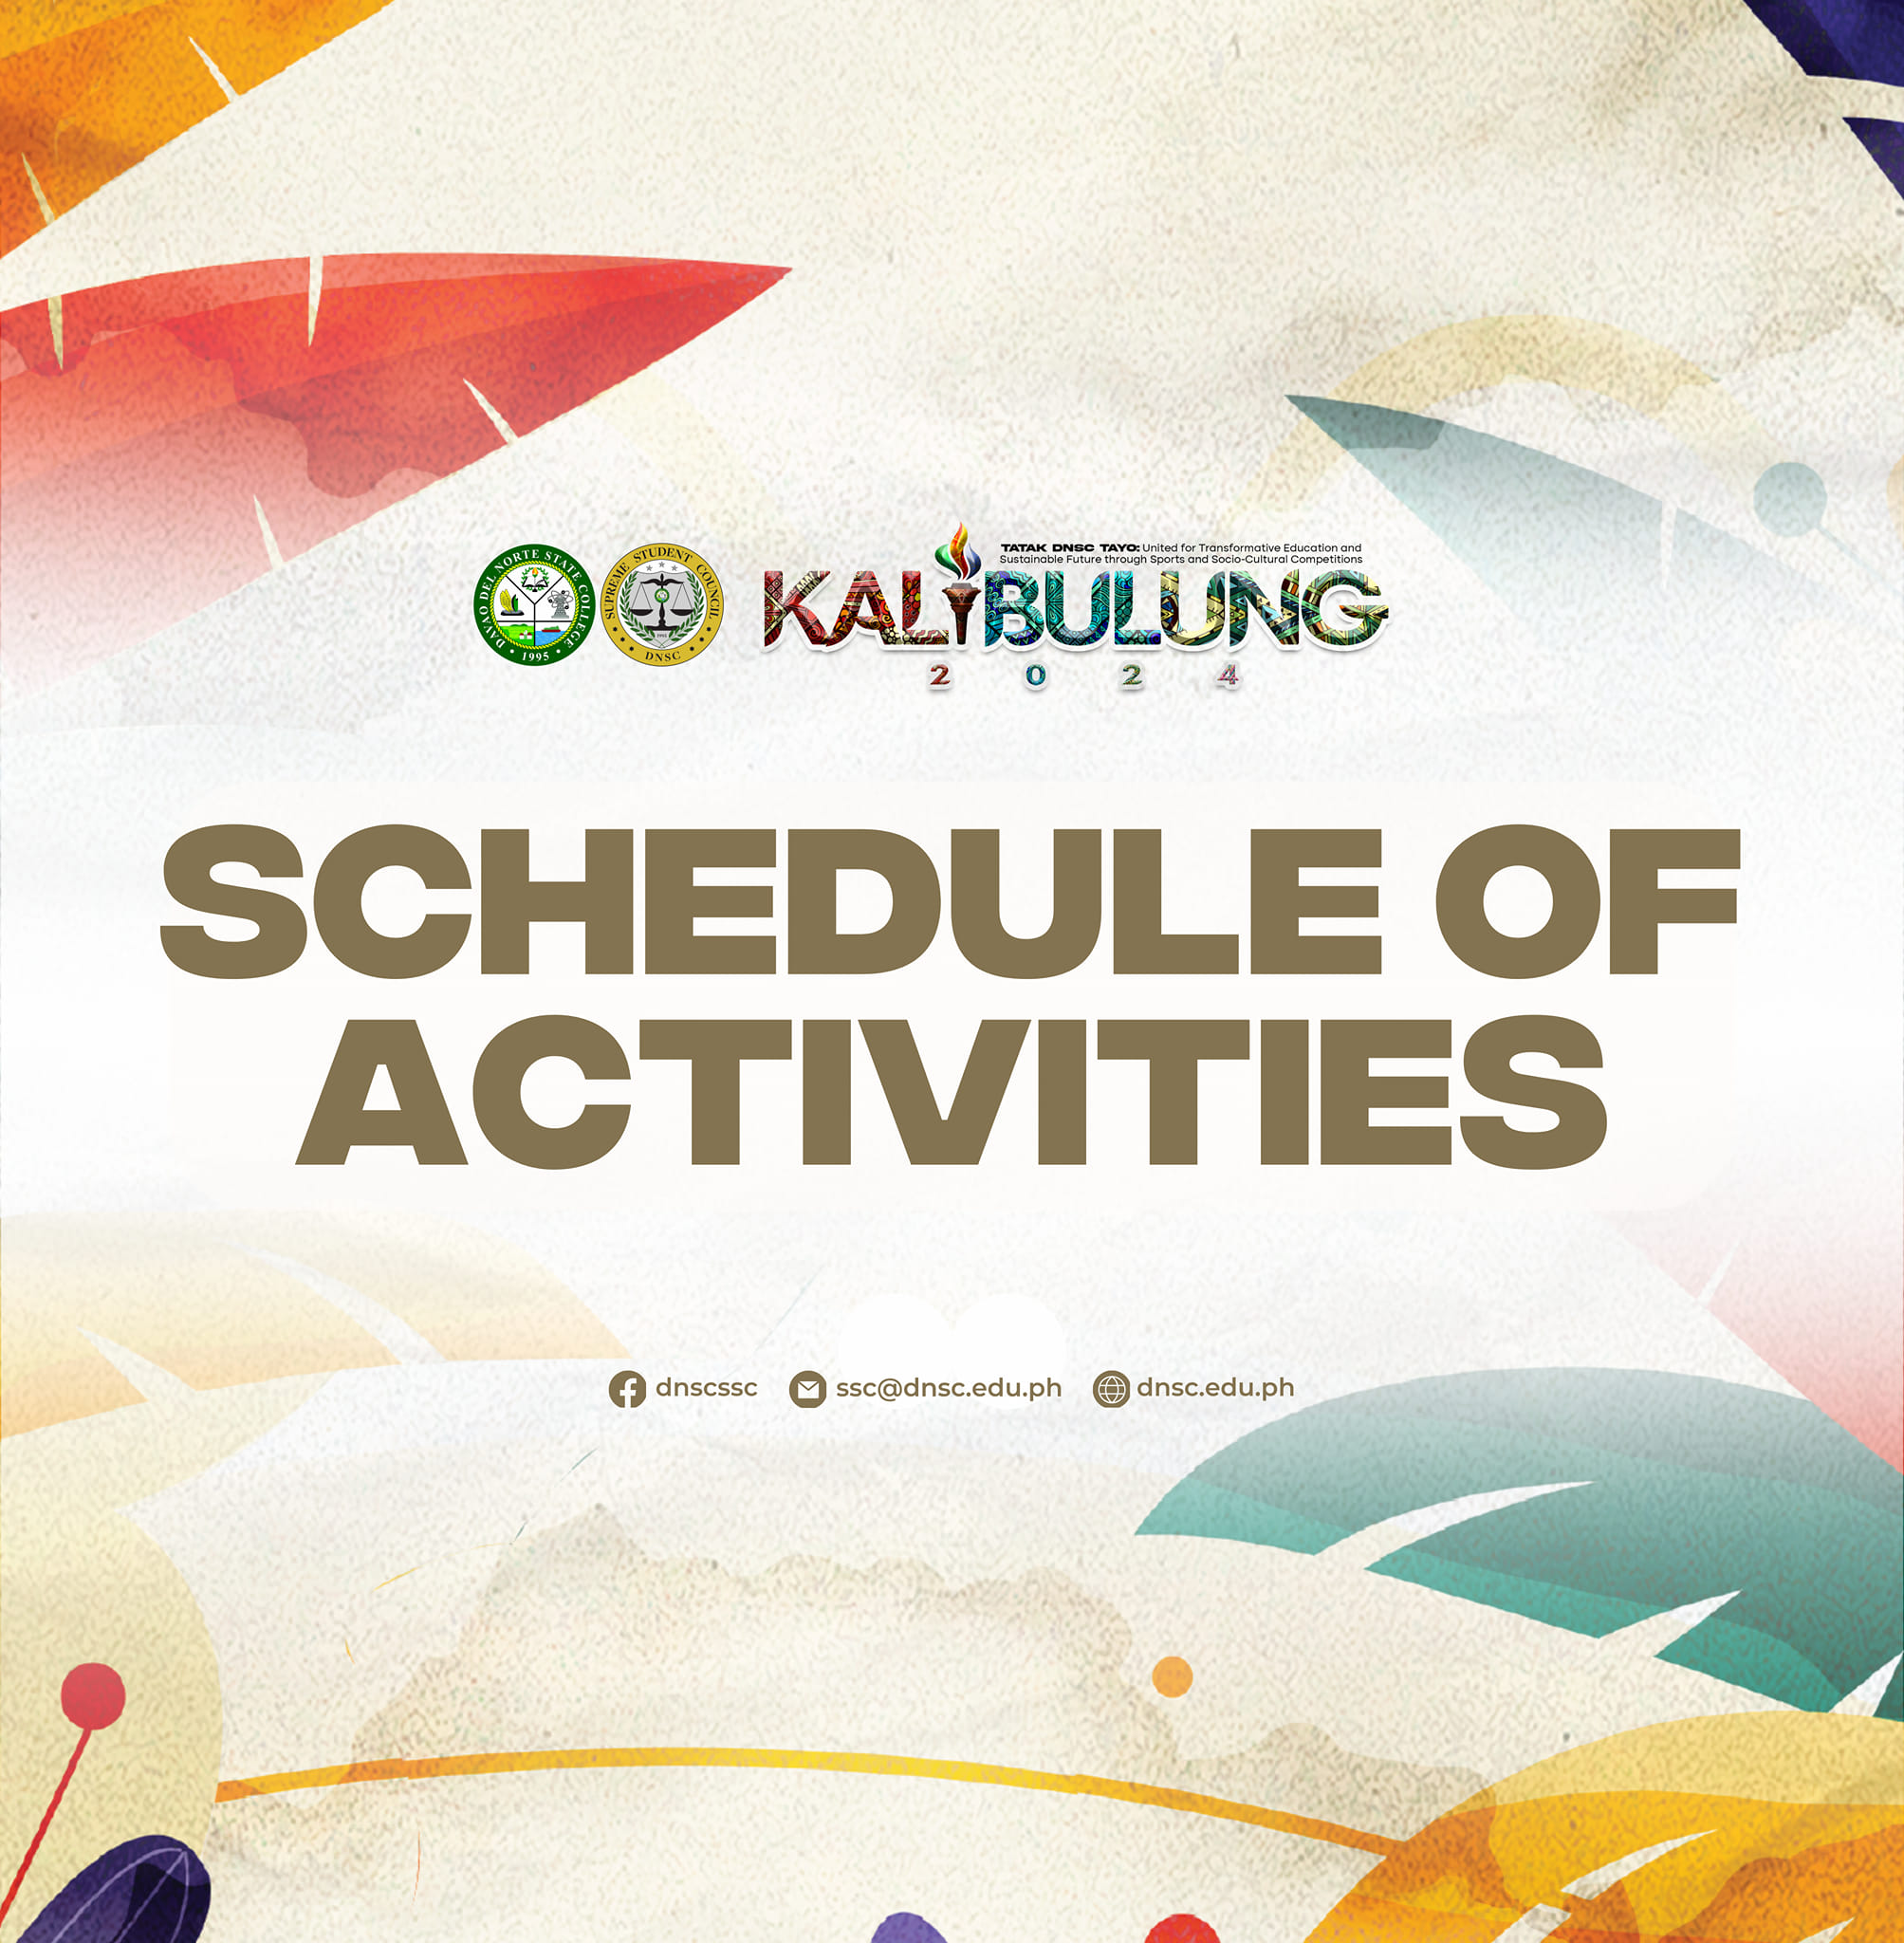 26th Charter Day Celebration and Kalibulung Festival 2024 Schedule